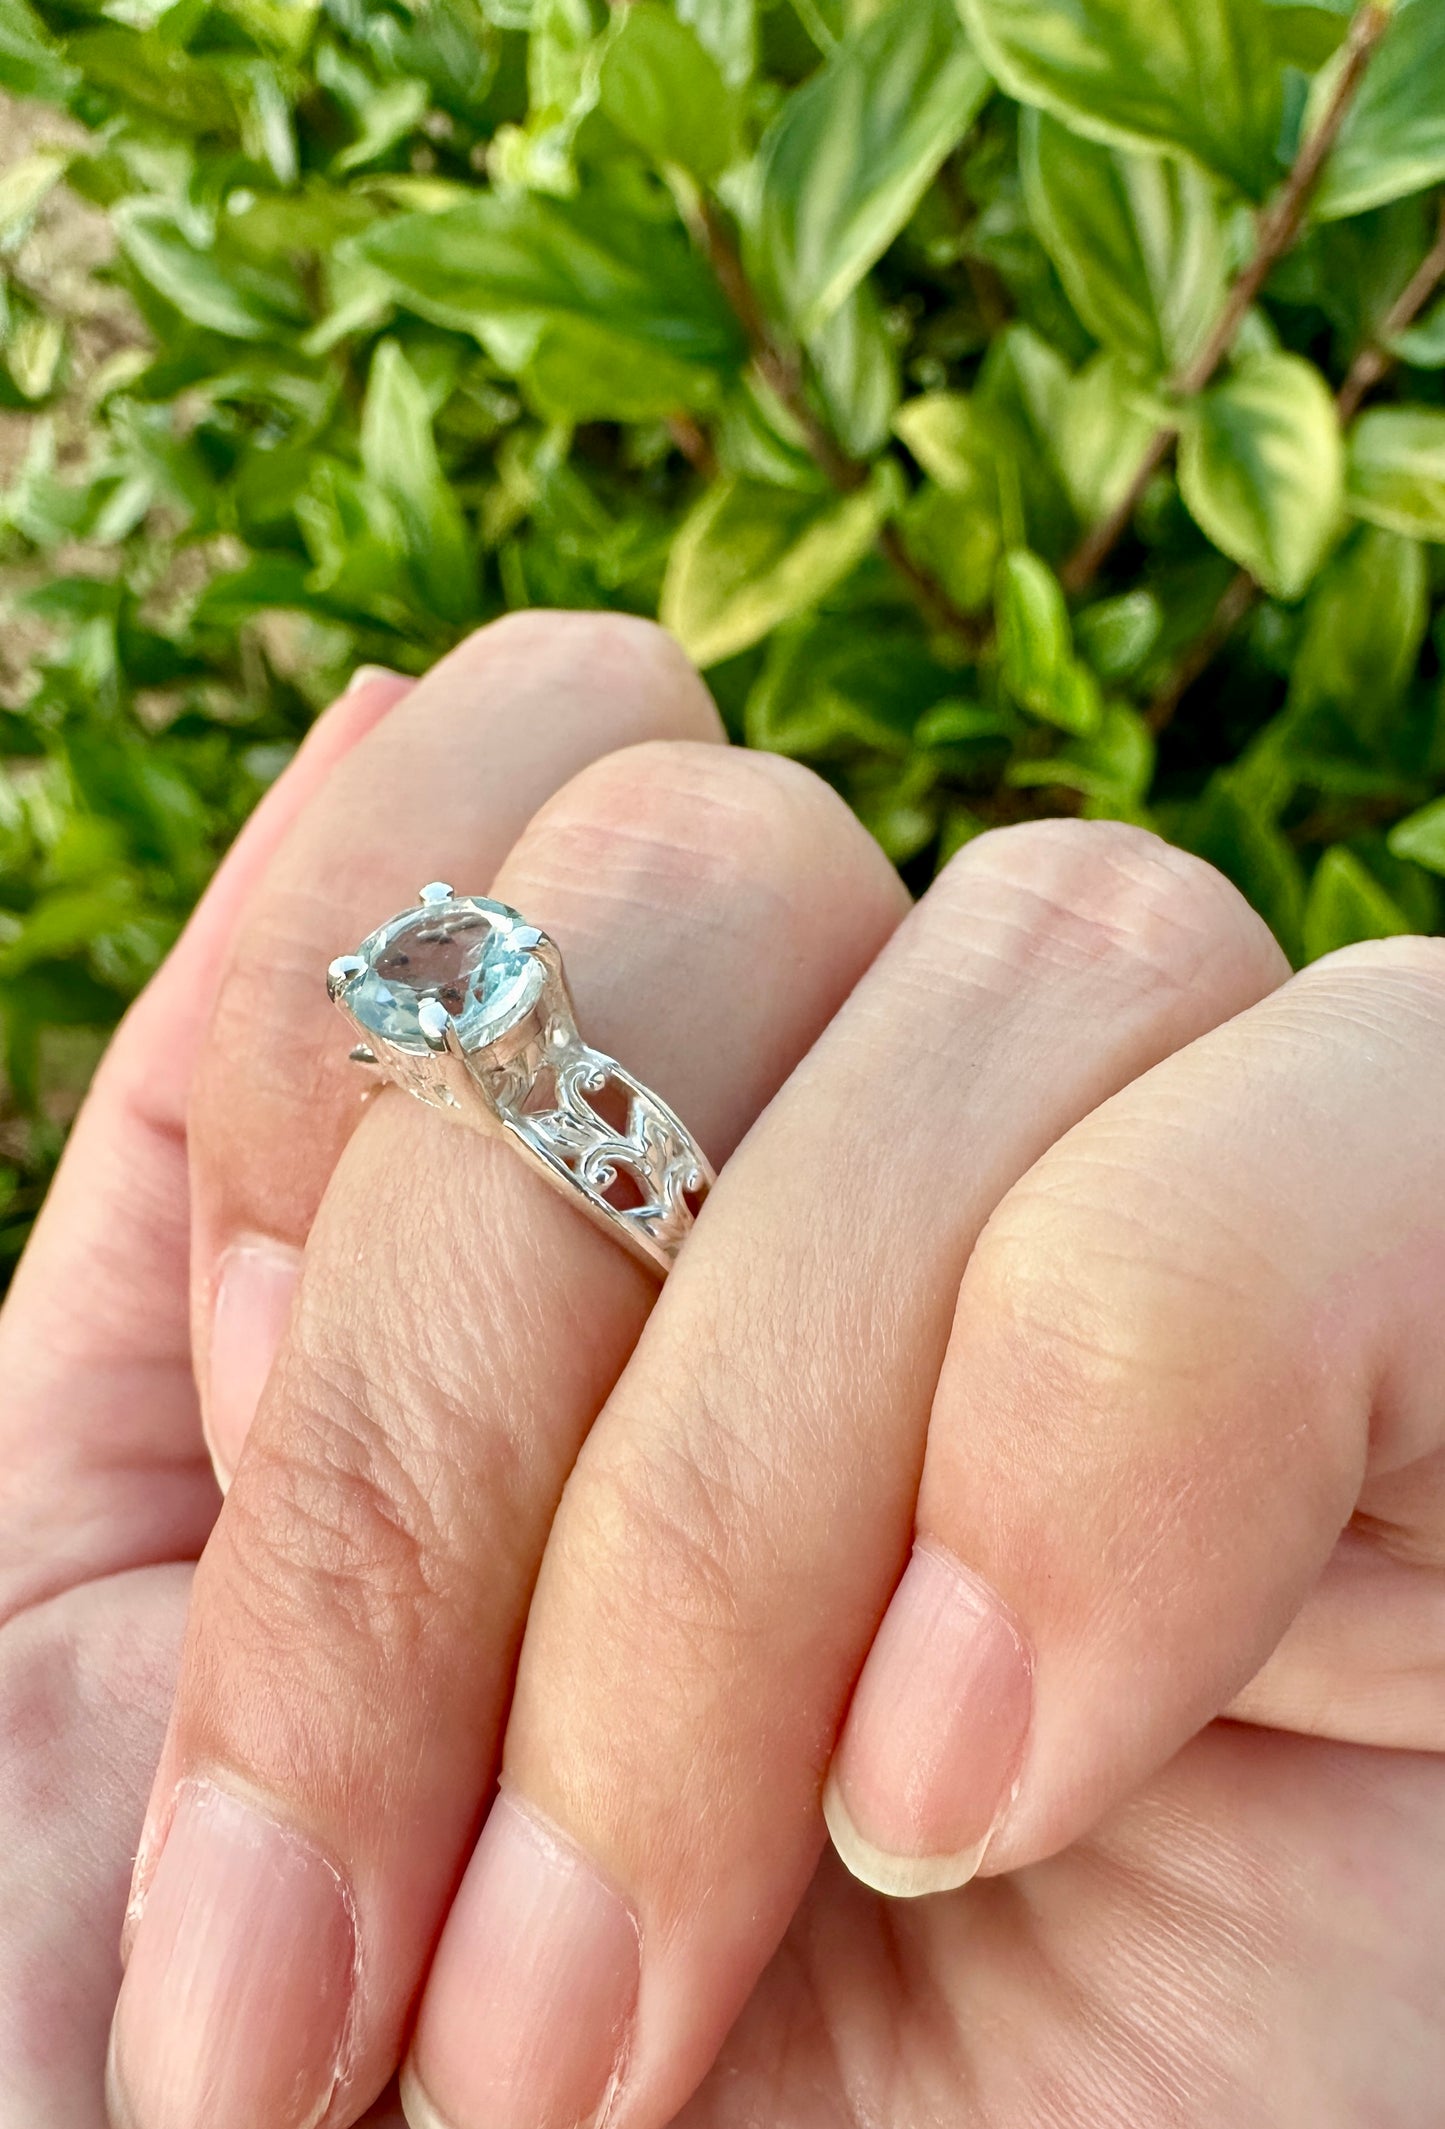 Aquamarine Sterling Silver Ring Size 6.25 - Genuine Aquamarine Gemstone - Elegant Sterling Silver Band - March Birthstone Ring - Perfect Gift for Her